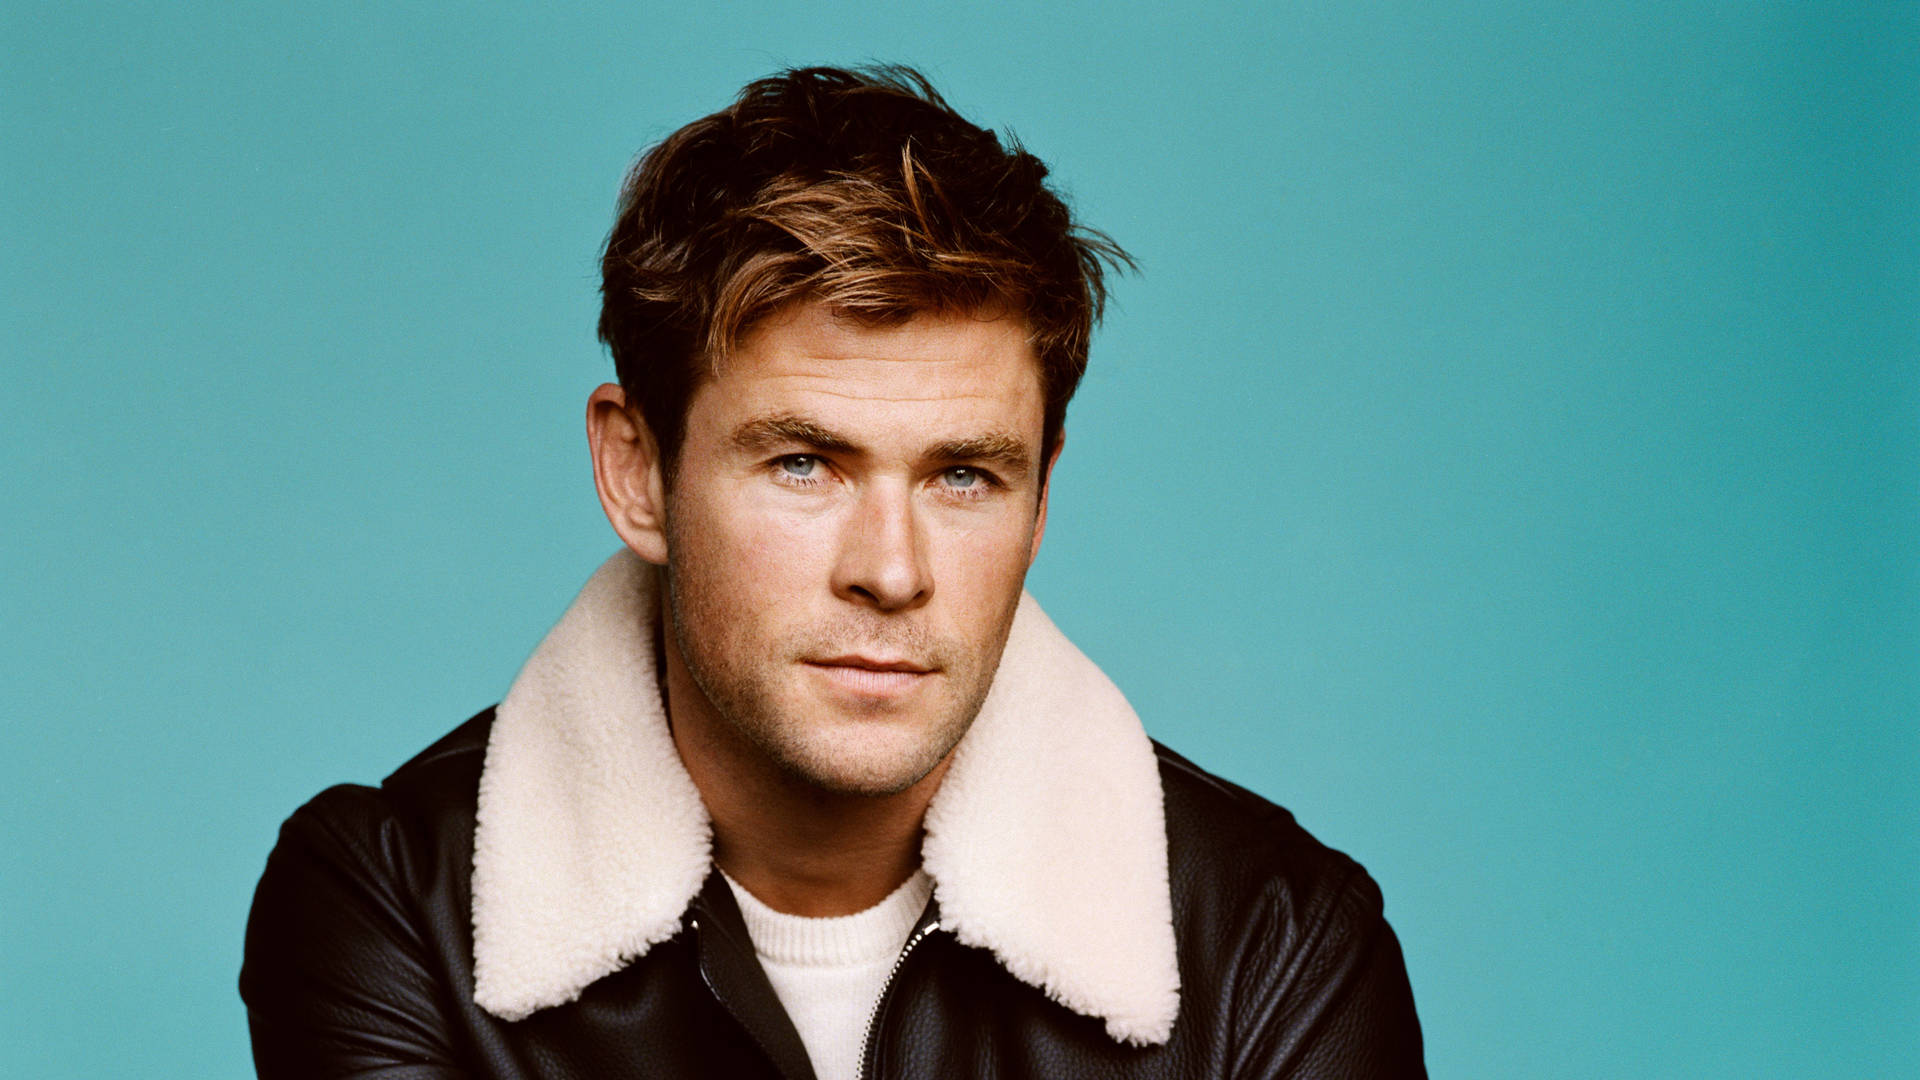 Chris Hemsworth Looks Dapper In A Fur And Leather Jacket.